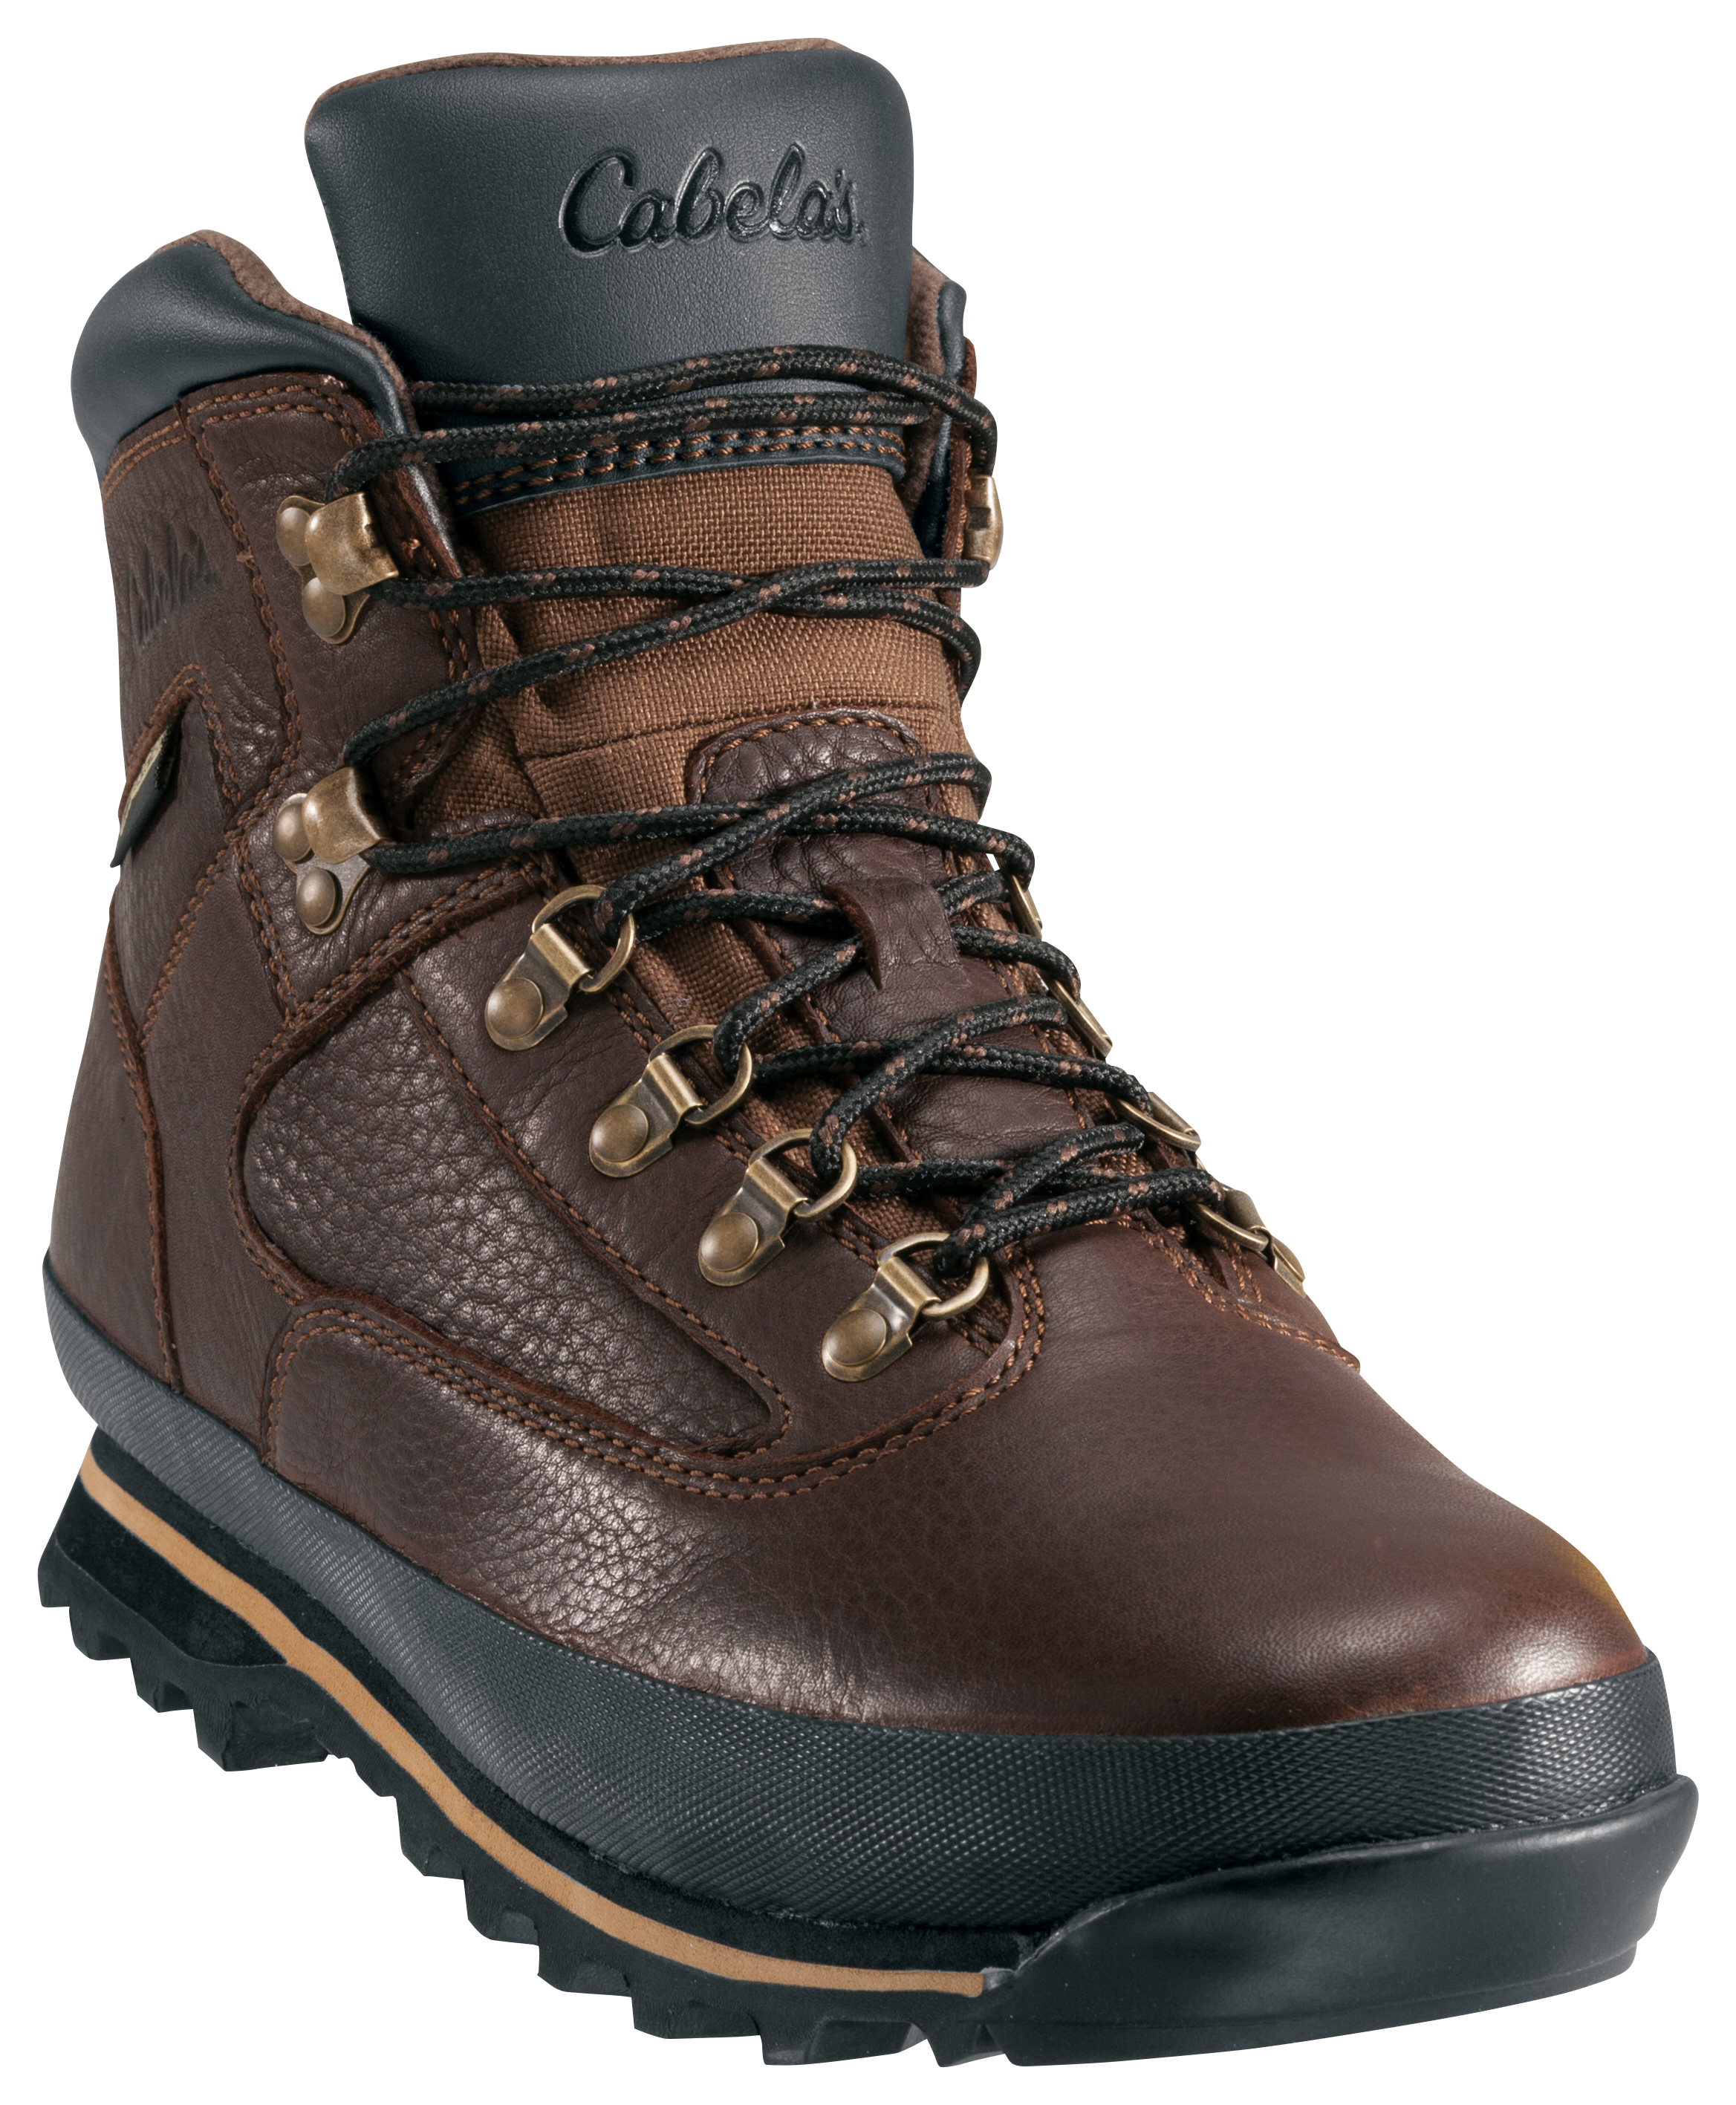 Cabela's Rimrock Mid GORE-TEX Hiking Boots for Men - Brown - 9.5M